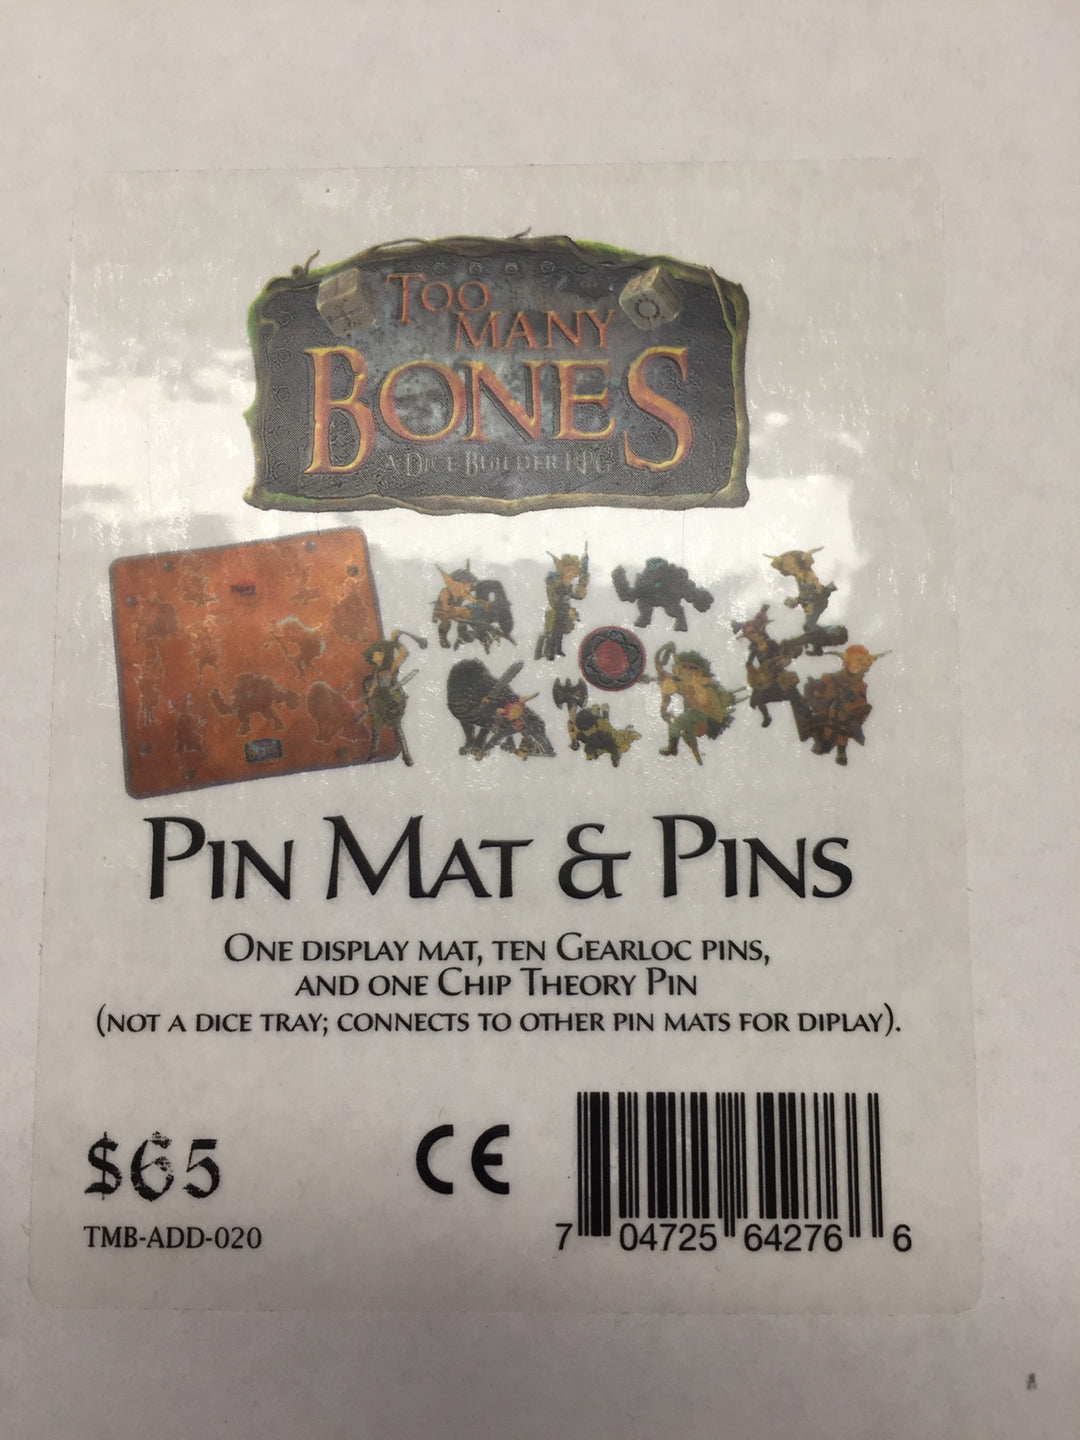 Too Many Bones: Enamel Pin Set for use with the board game Spring Sale, Too Many Bones, sold at the BoardGameGeek Store